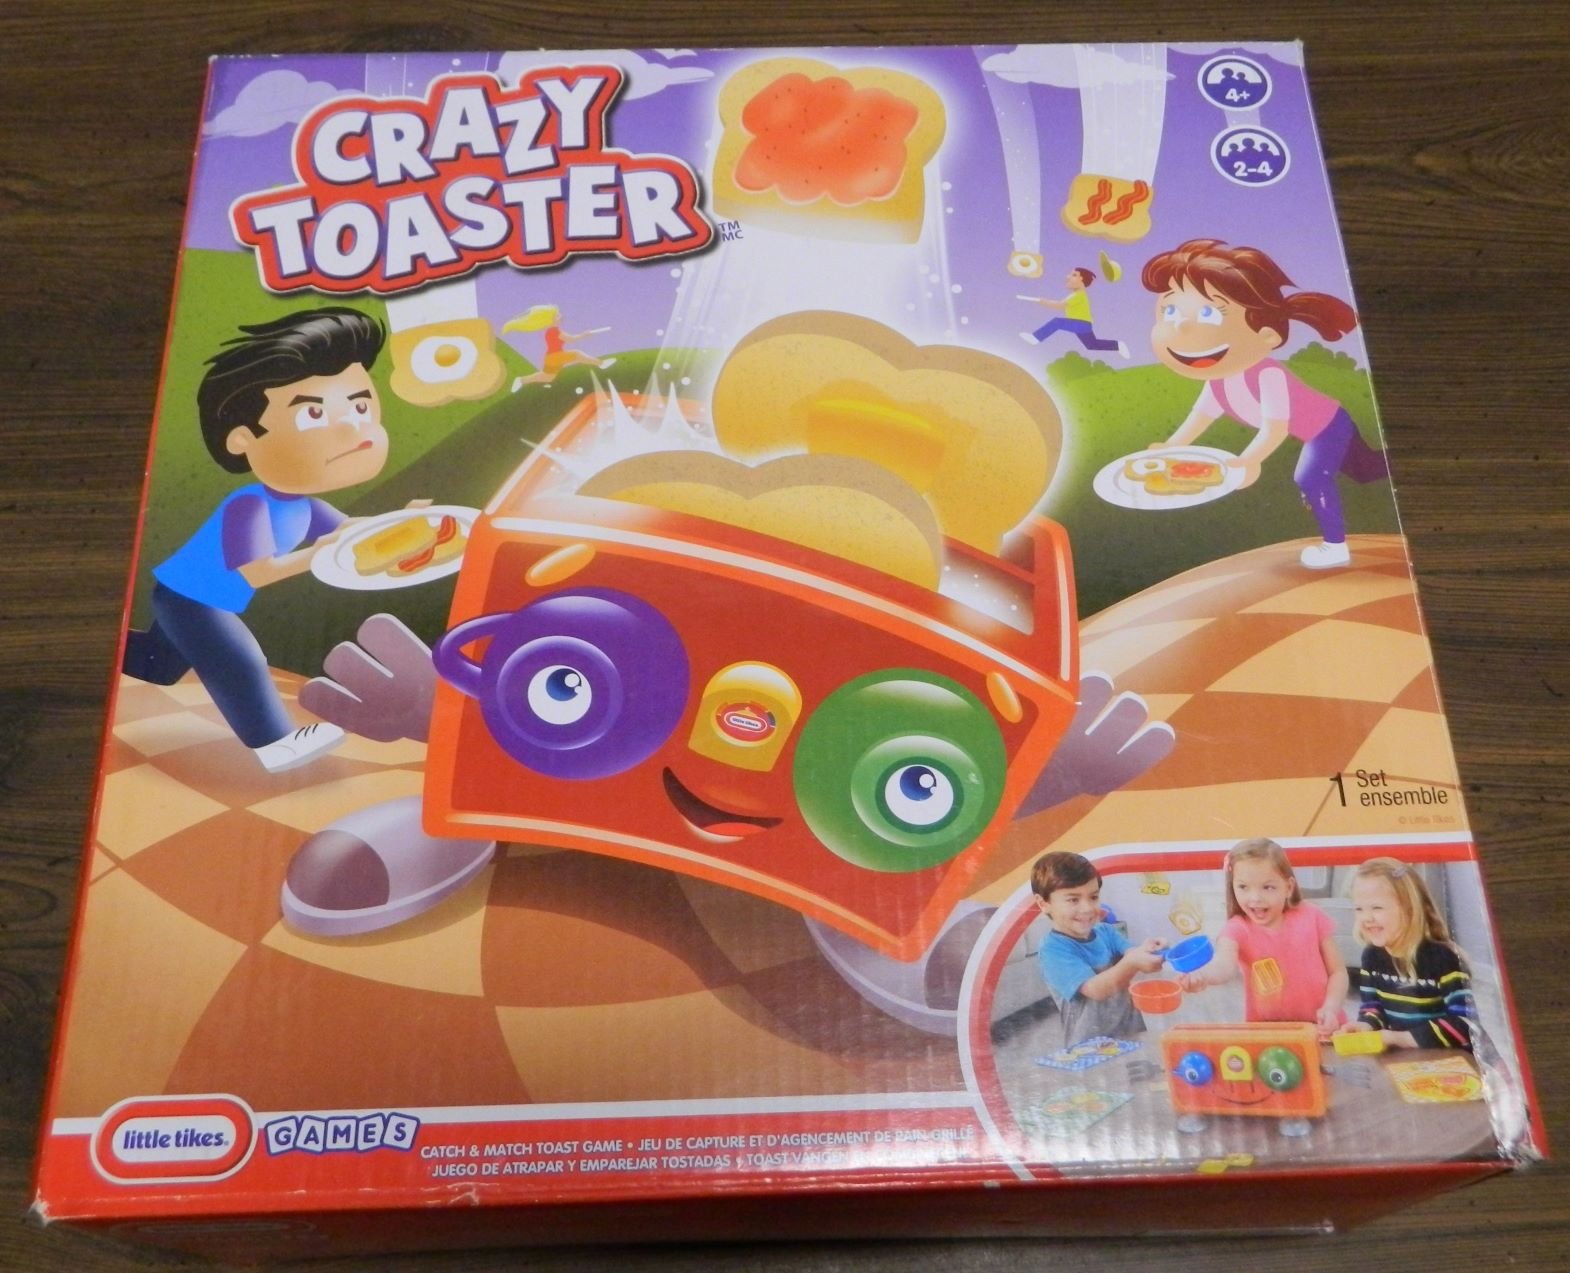 Crazy Toaster Board Game Review and Rules